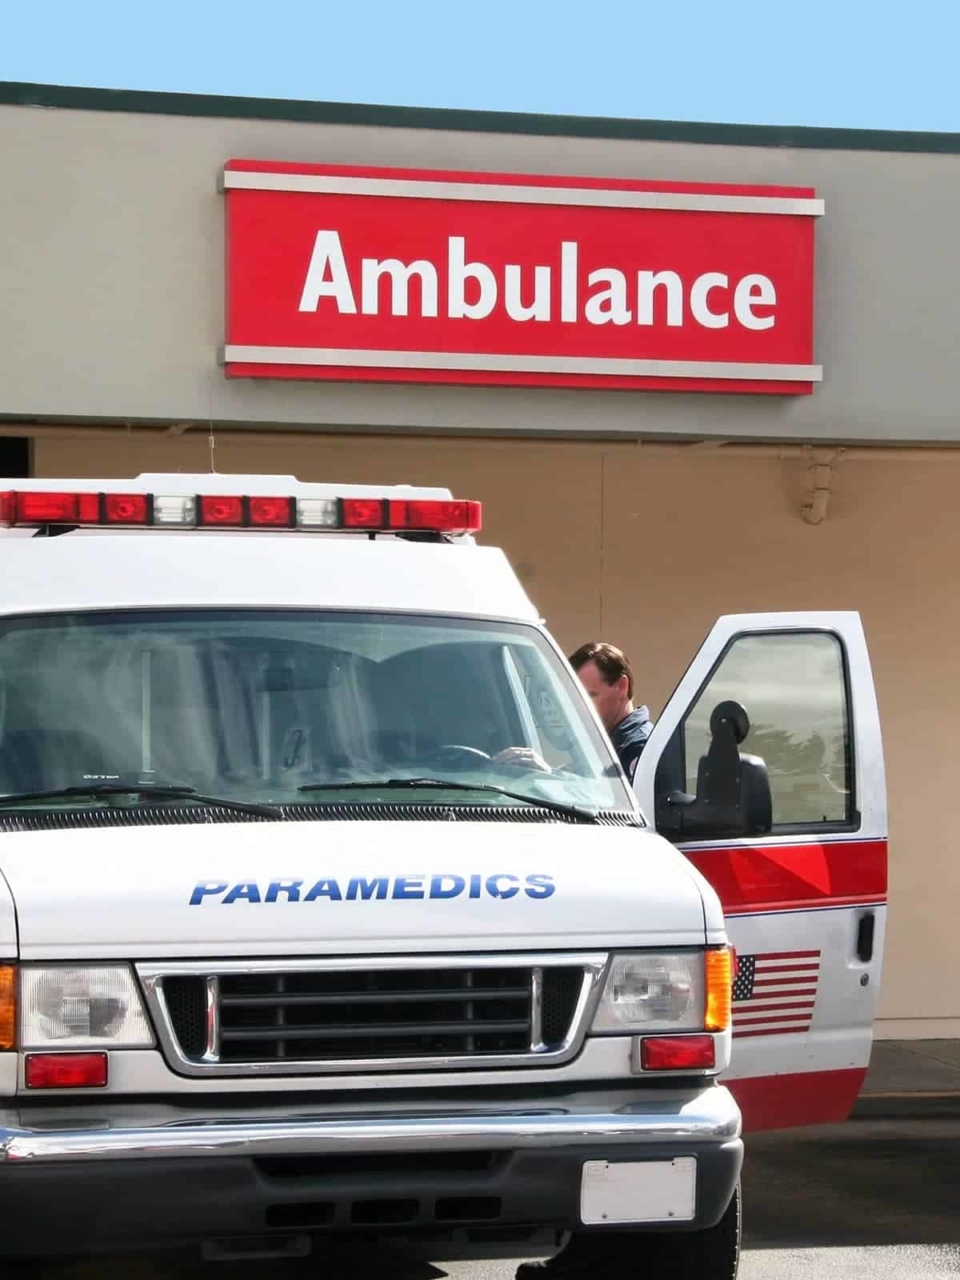 Ambulance parked out in front of a hospital